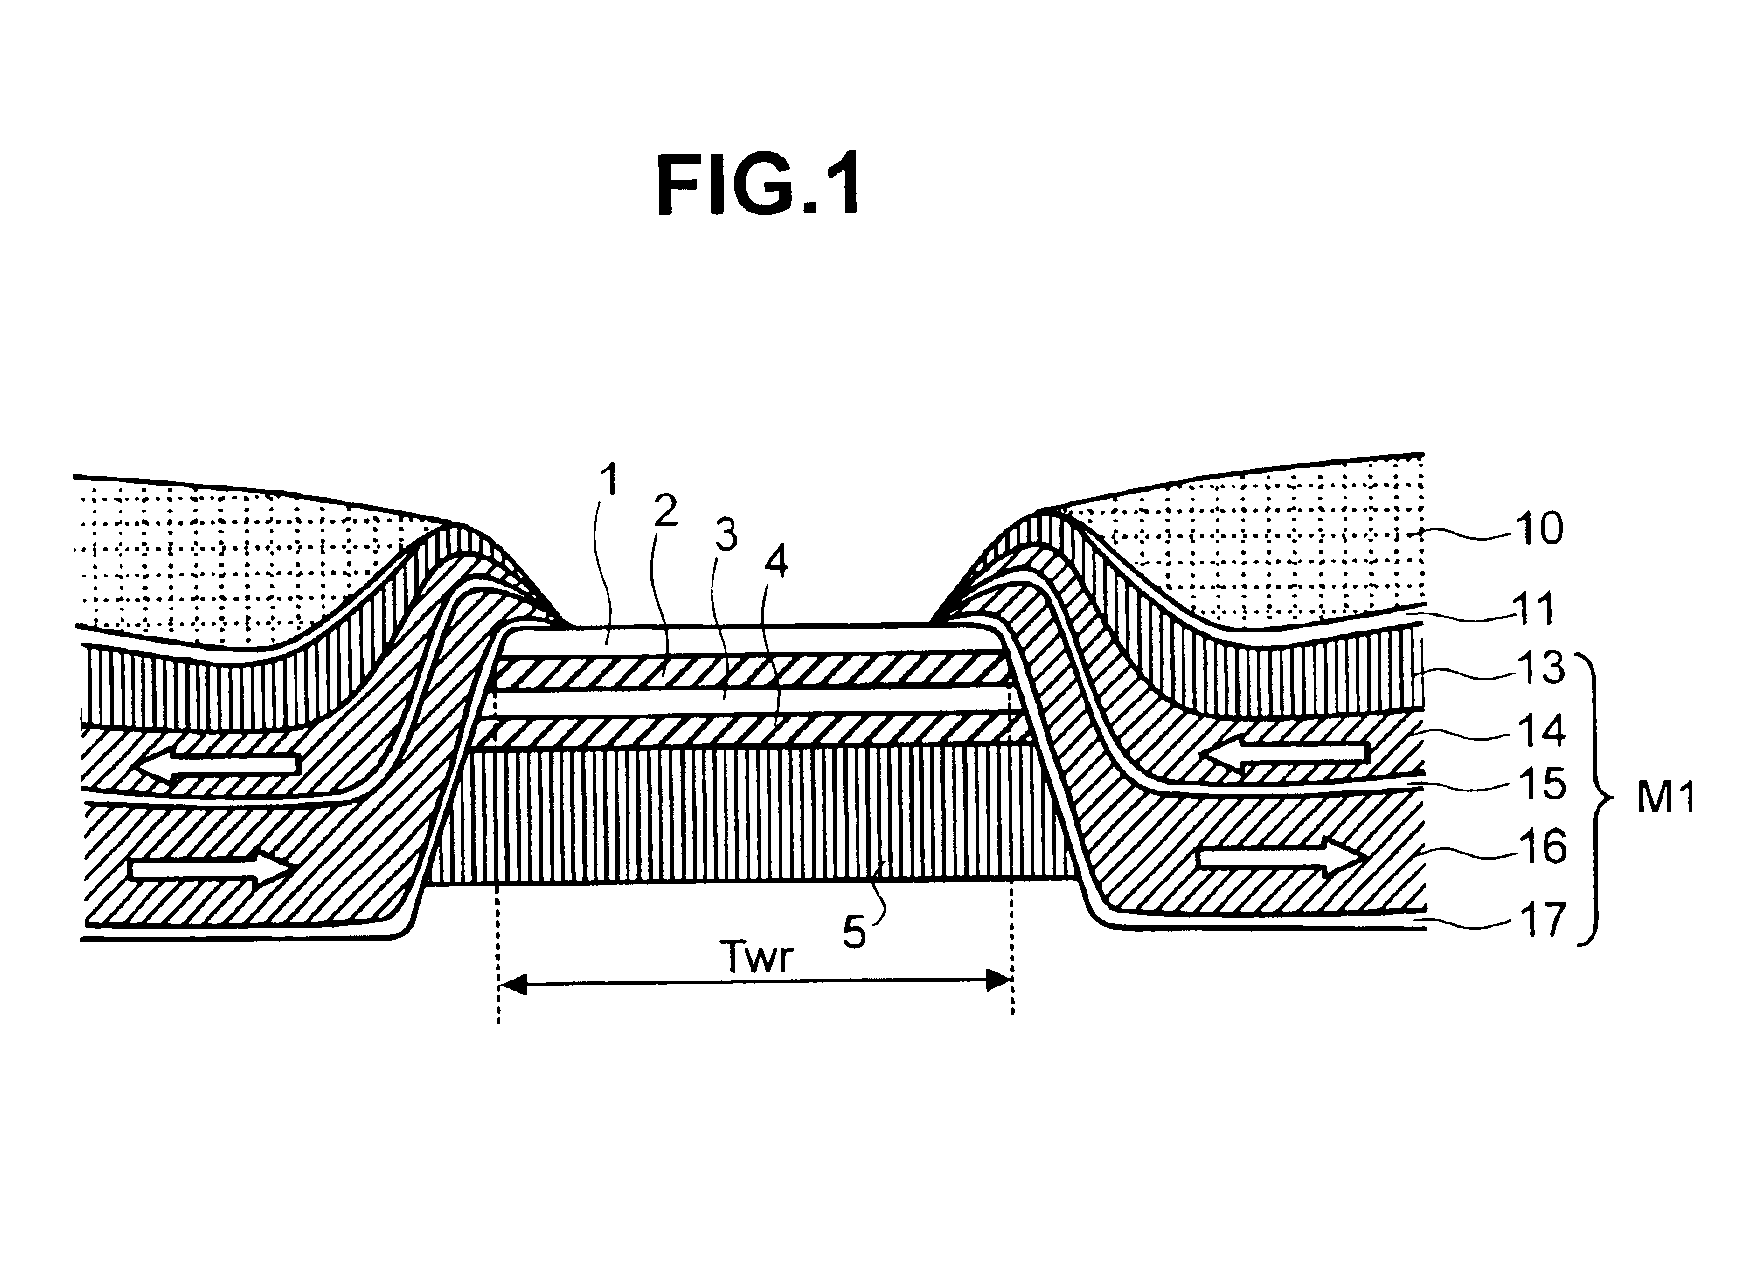 Magnetic head with a lamination stack to control the magnetic domain